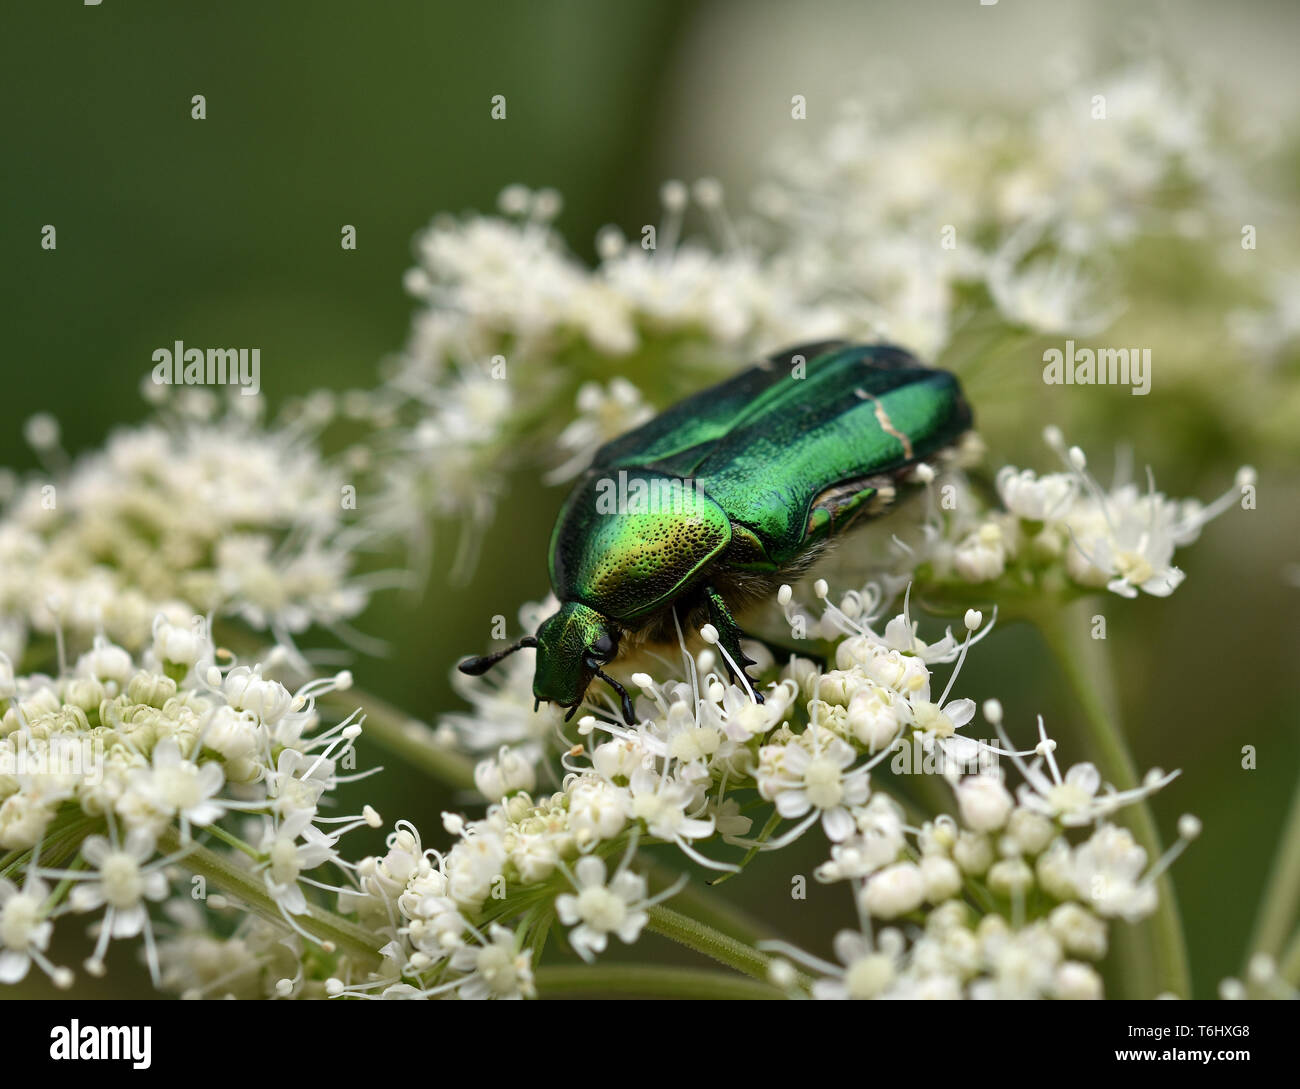 flower chafer, goldsmith beetle, rose chafer, Stock Photo